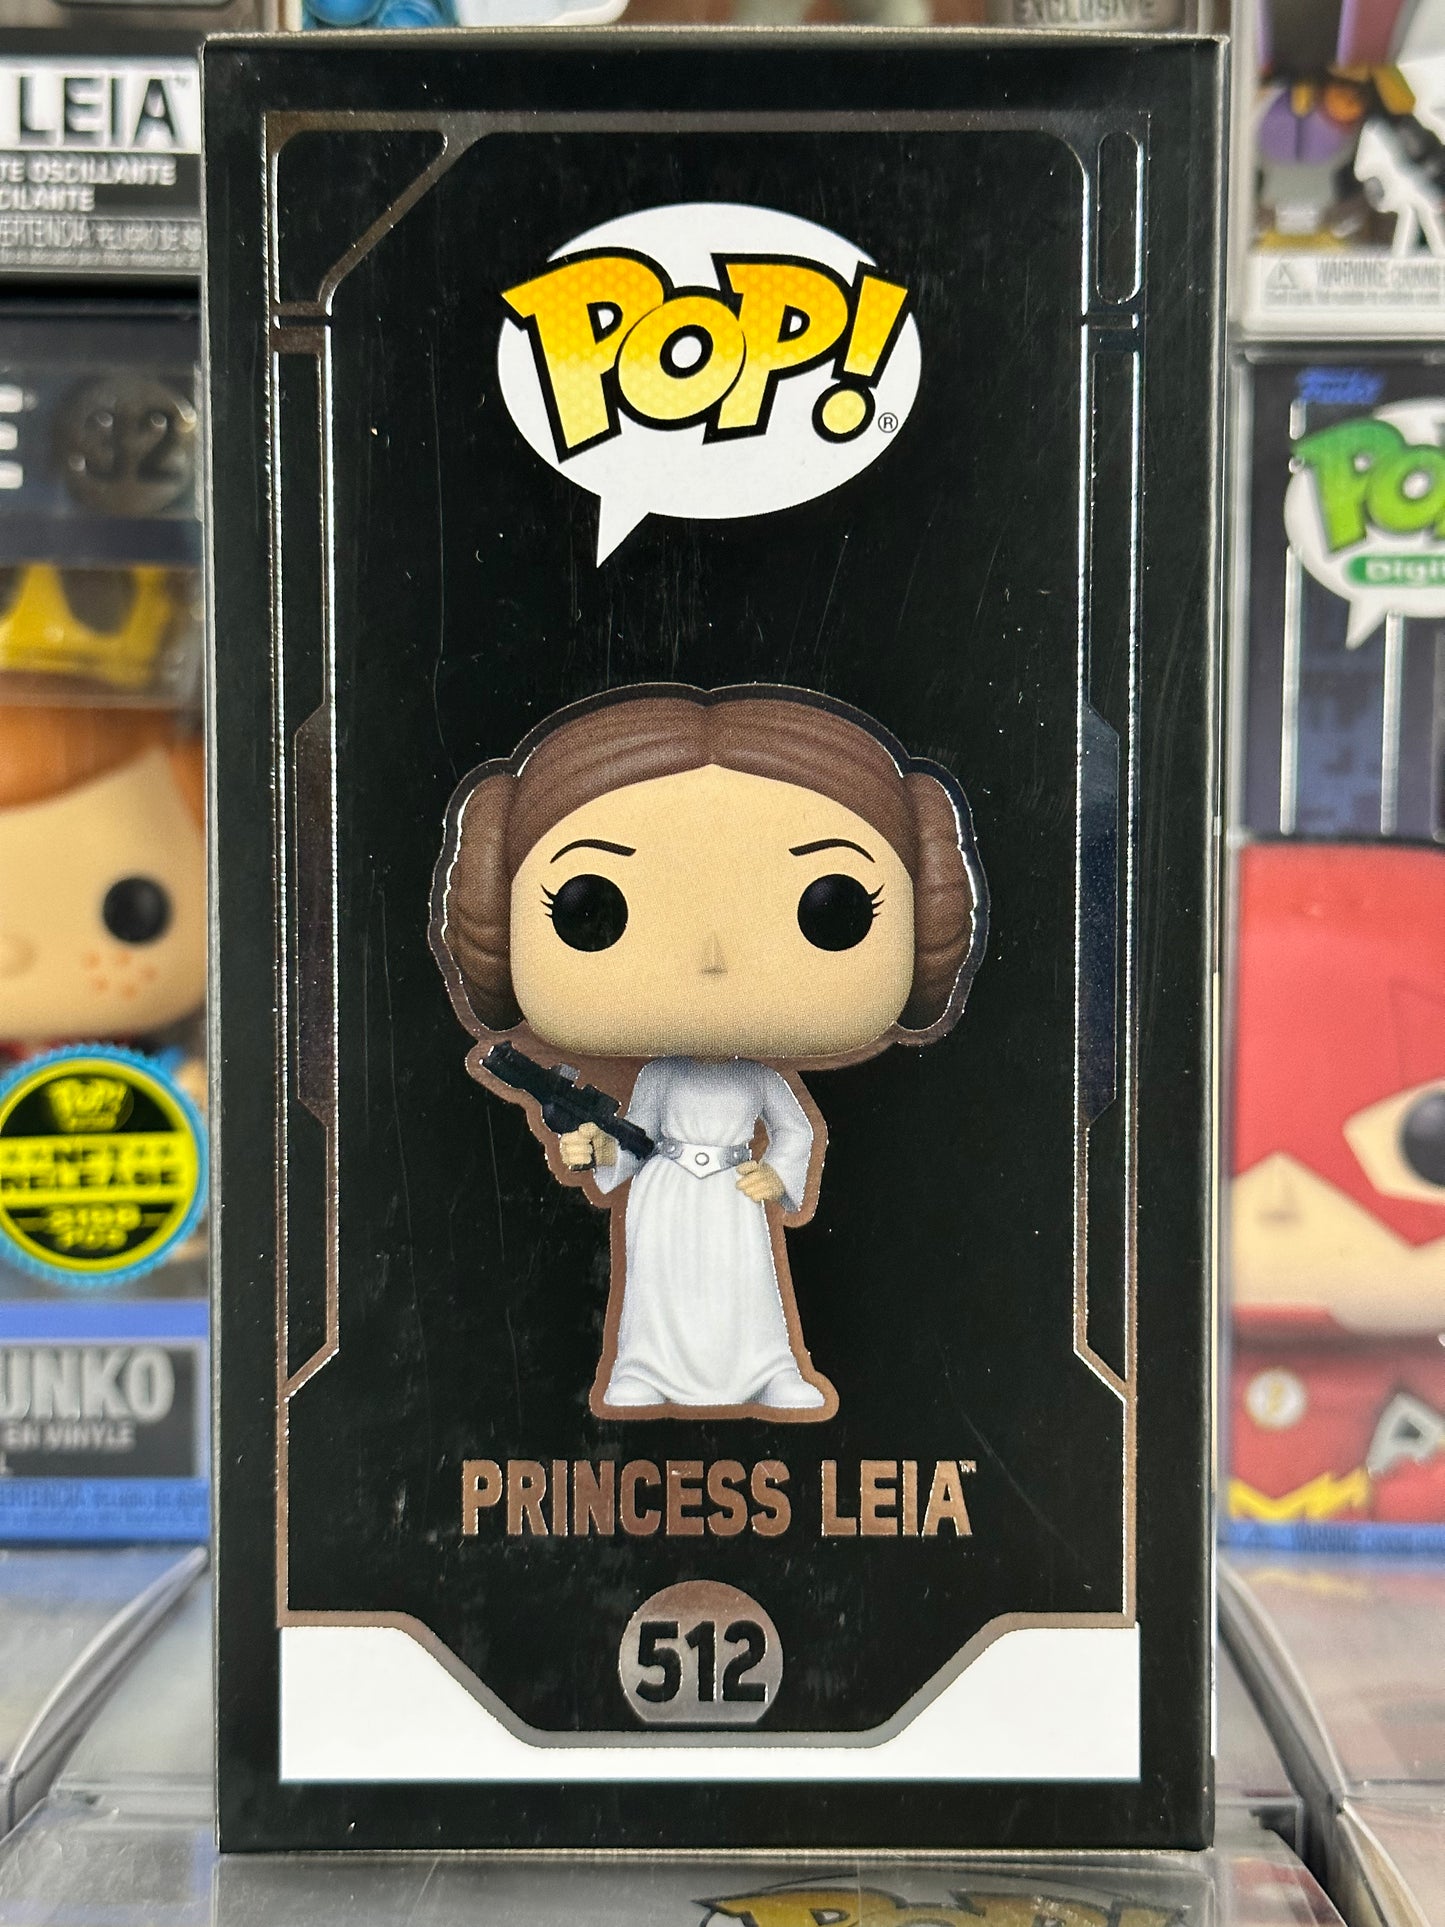 Star Wars - Princess Leia (512) (2022 Galactic Convention Exclusive)